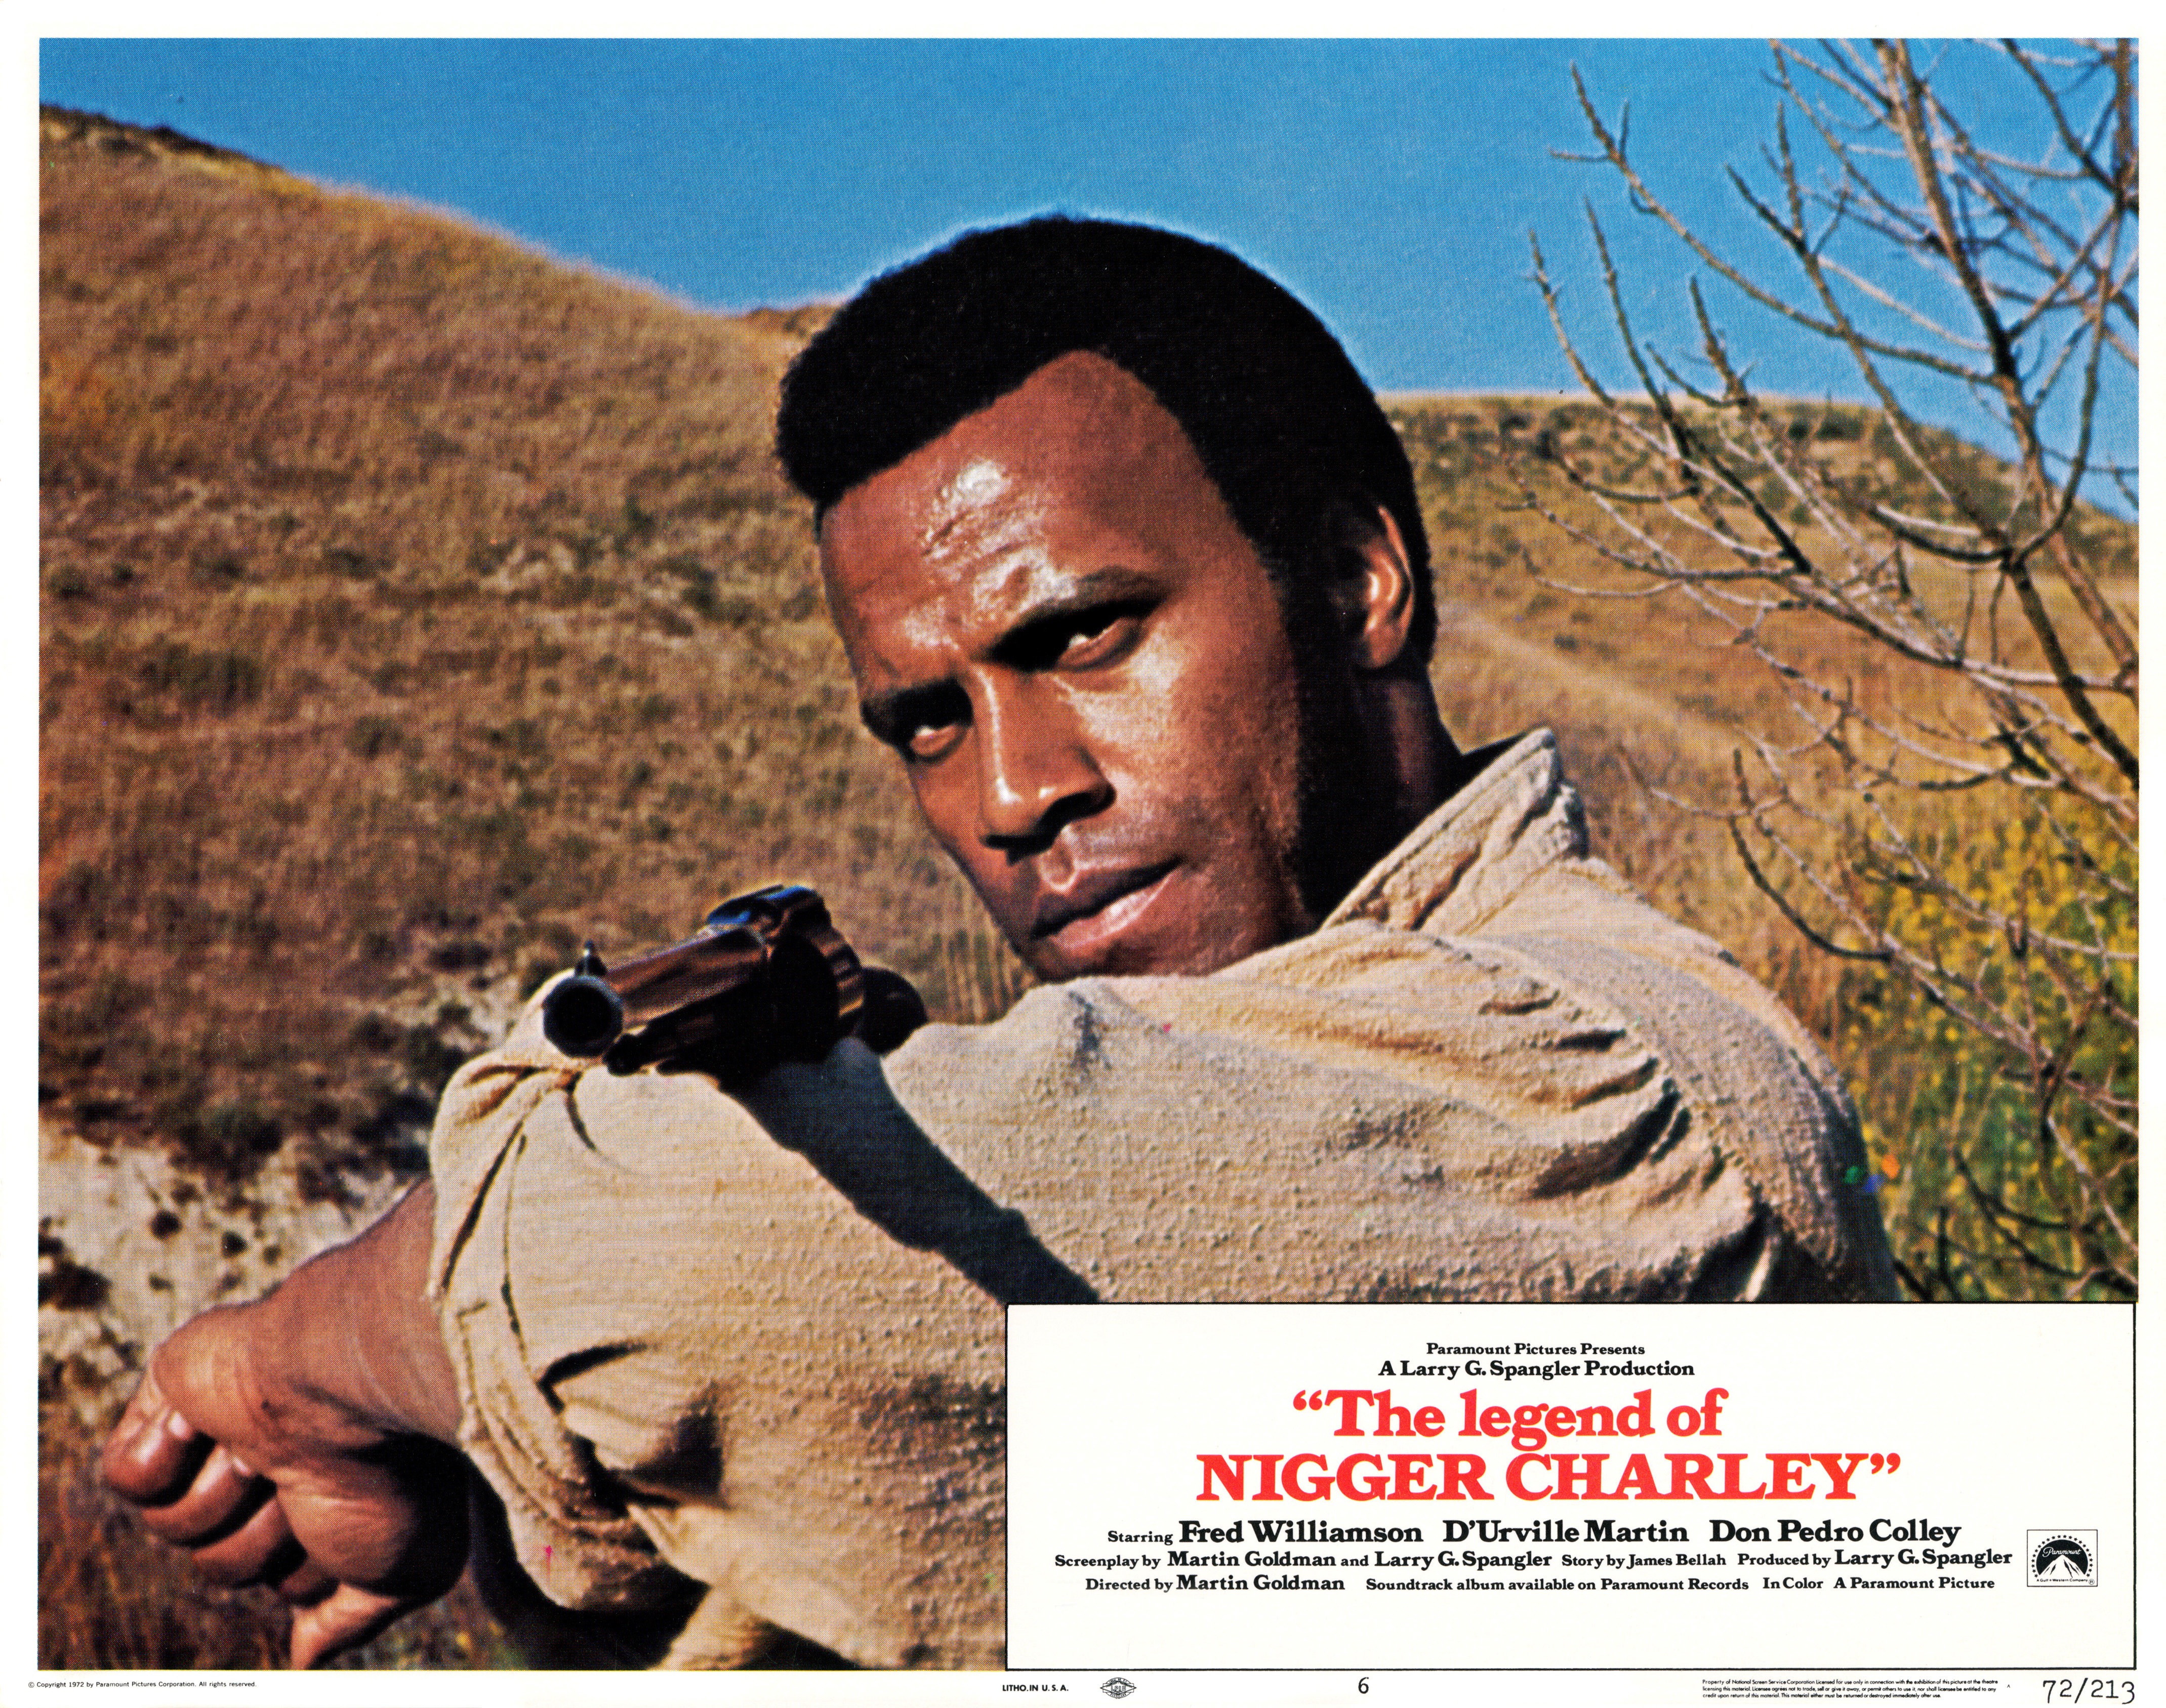 This is the lobby card from The Legend of Nigger Charley.